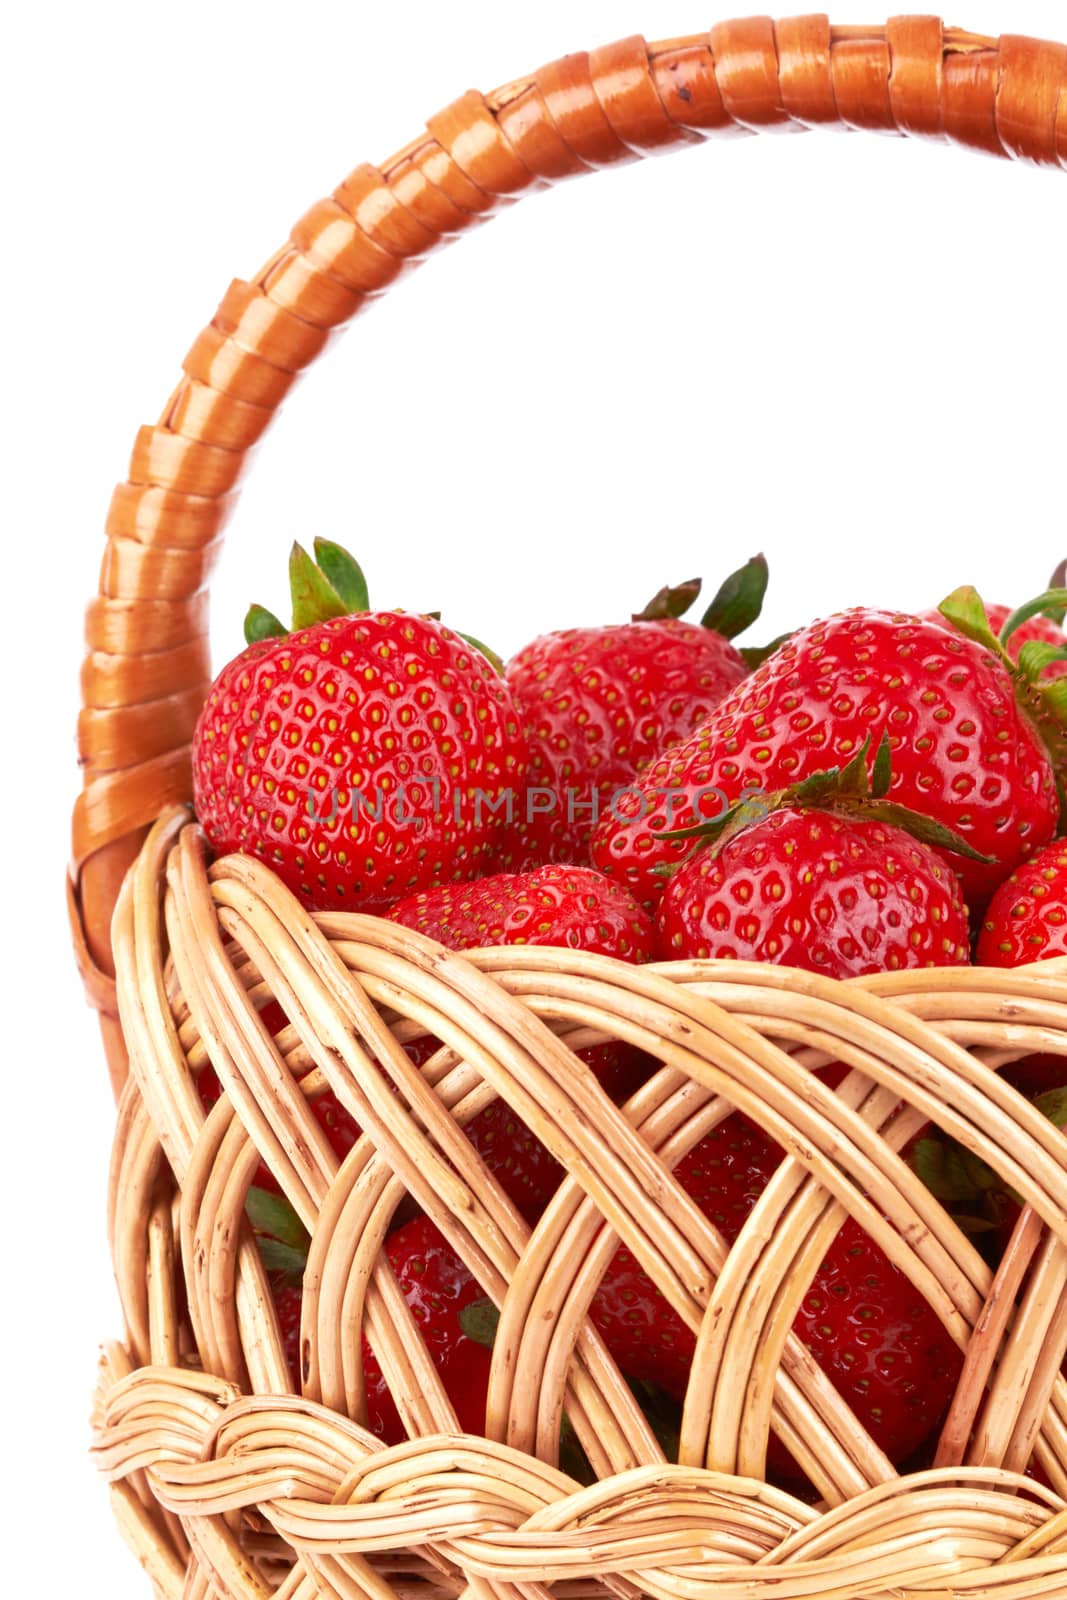 Sweet ripe strawberries in basket isolated on white 